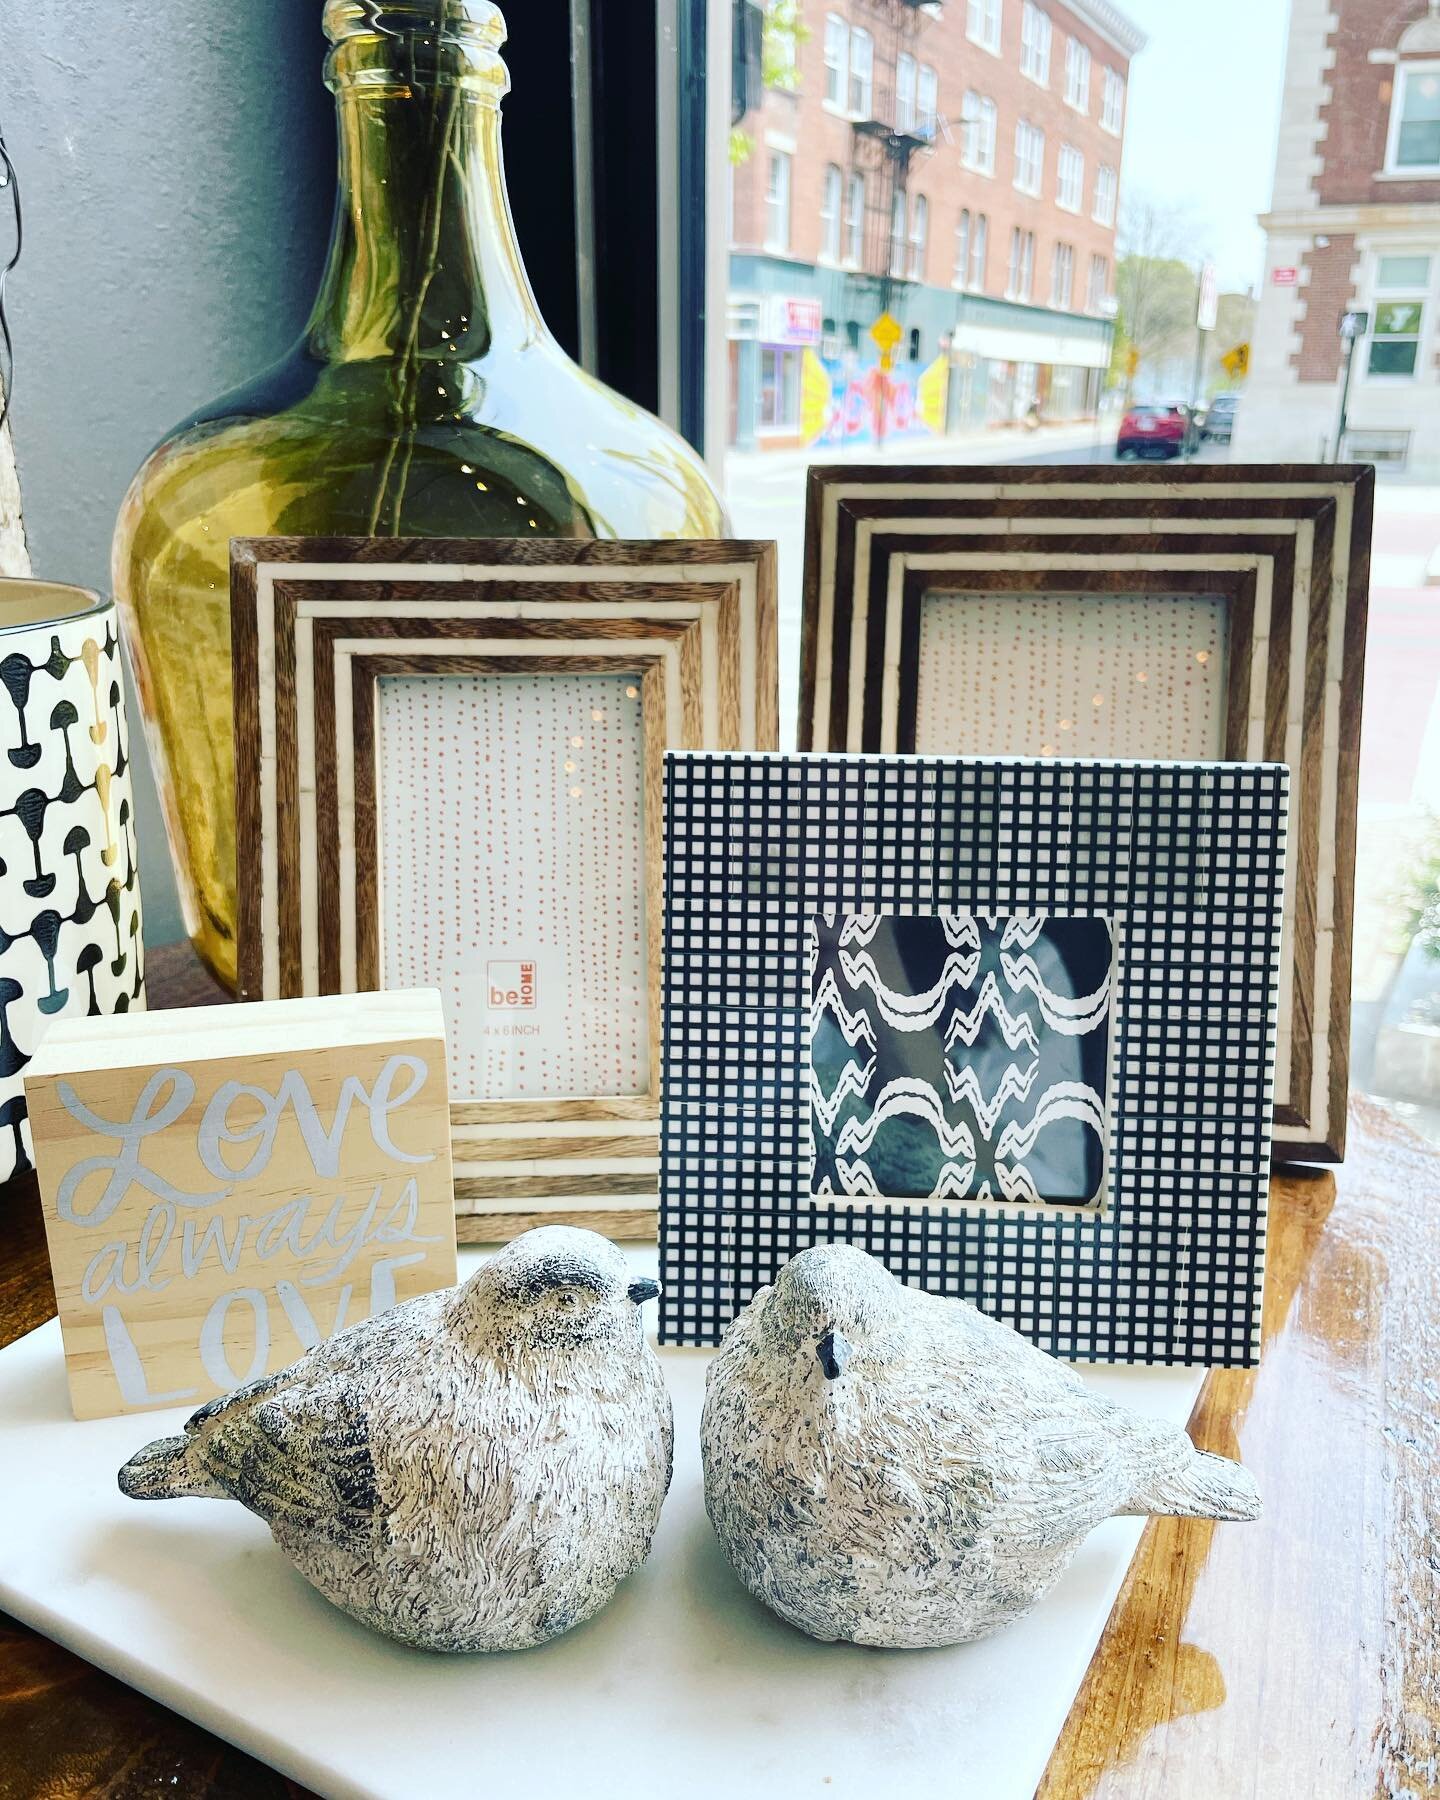 Here&rsquo;s your Mothers Day gift idea for today! Beautiful picture frames to add your special memory to and make mom smile 😊 #frameyourmemories #momslovethesmallthings #showheryouloveher #shoponnorth #heartoftheberkshires #supportlocalbusiness